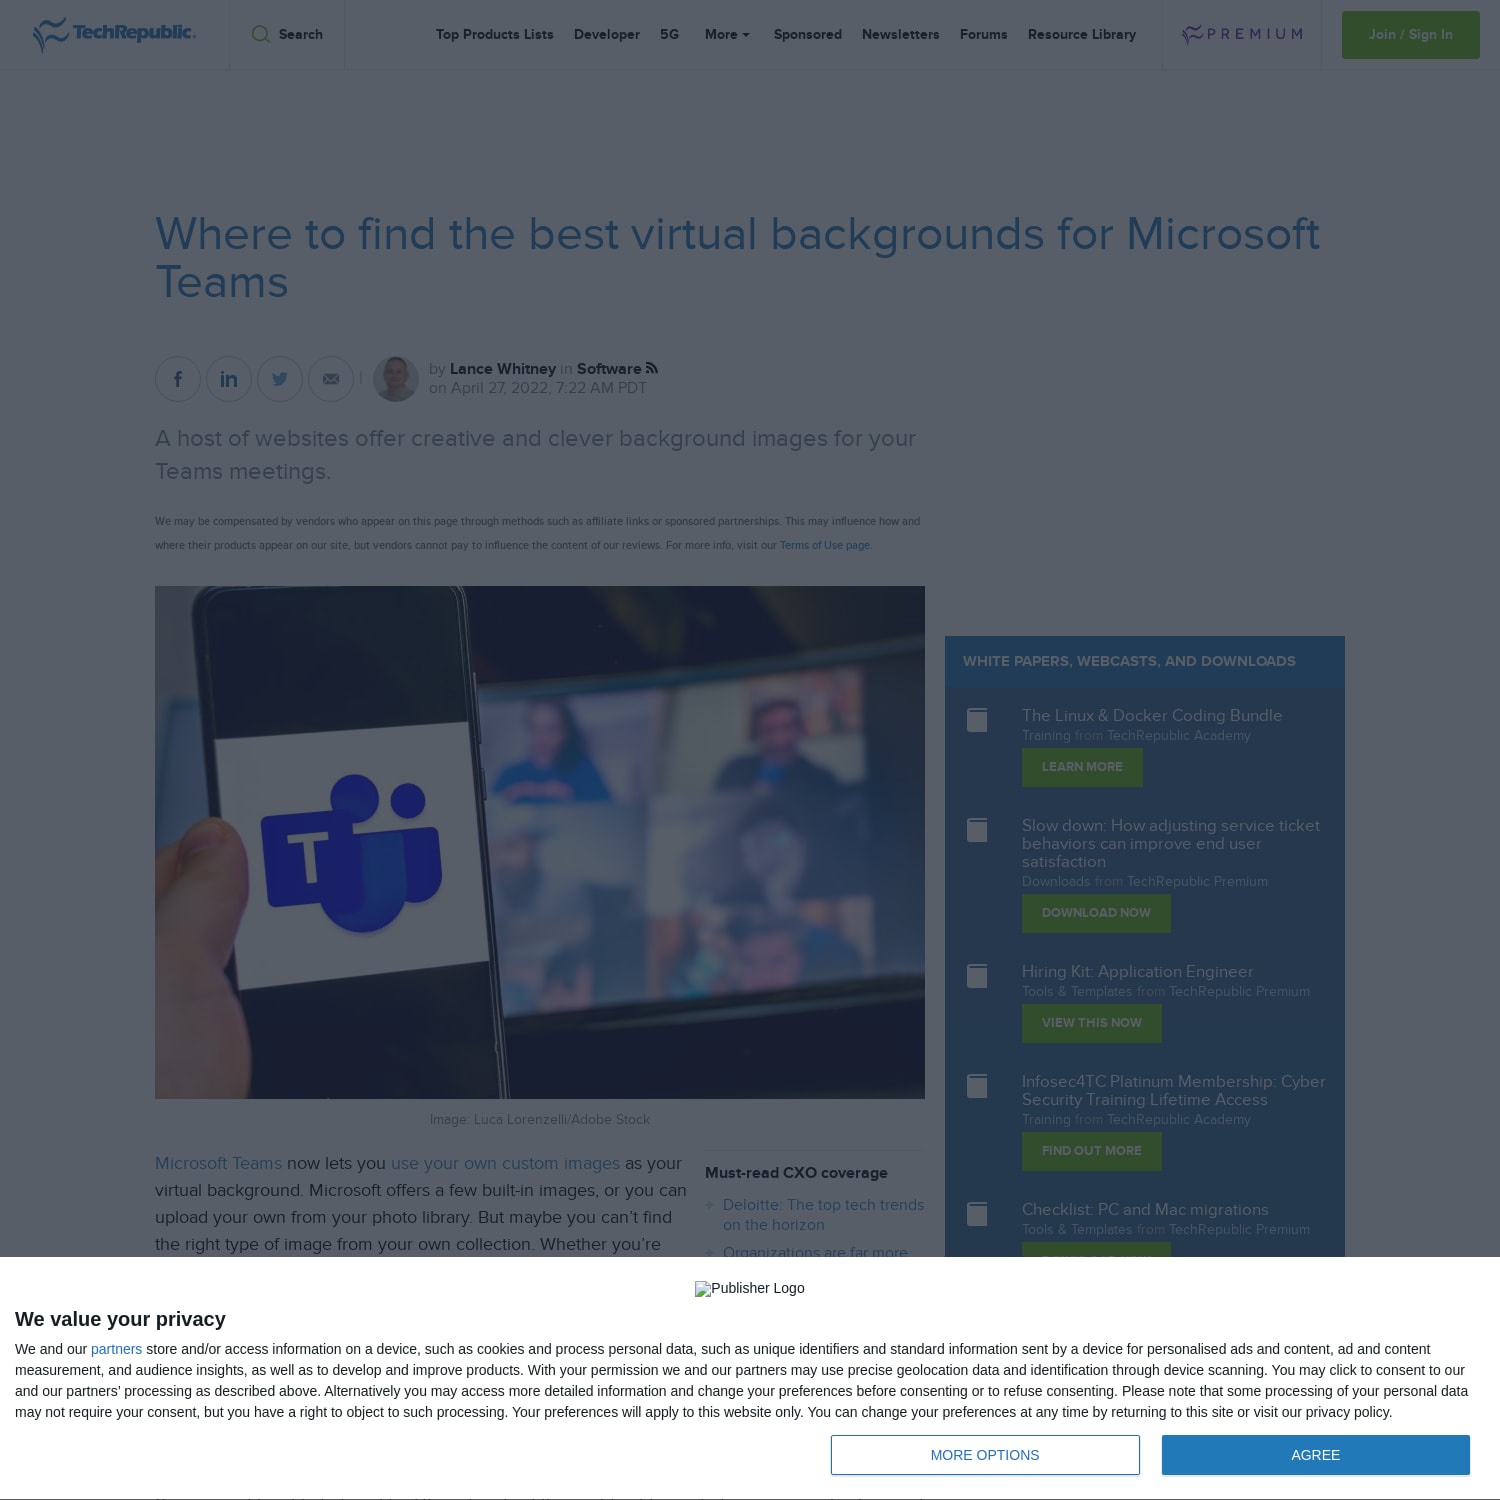 Where to find the best virtual backgrounds for Microsoft Teams